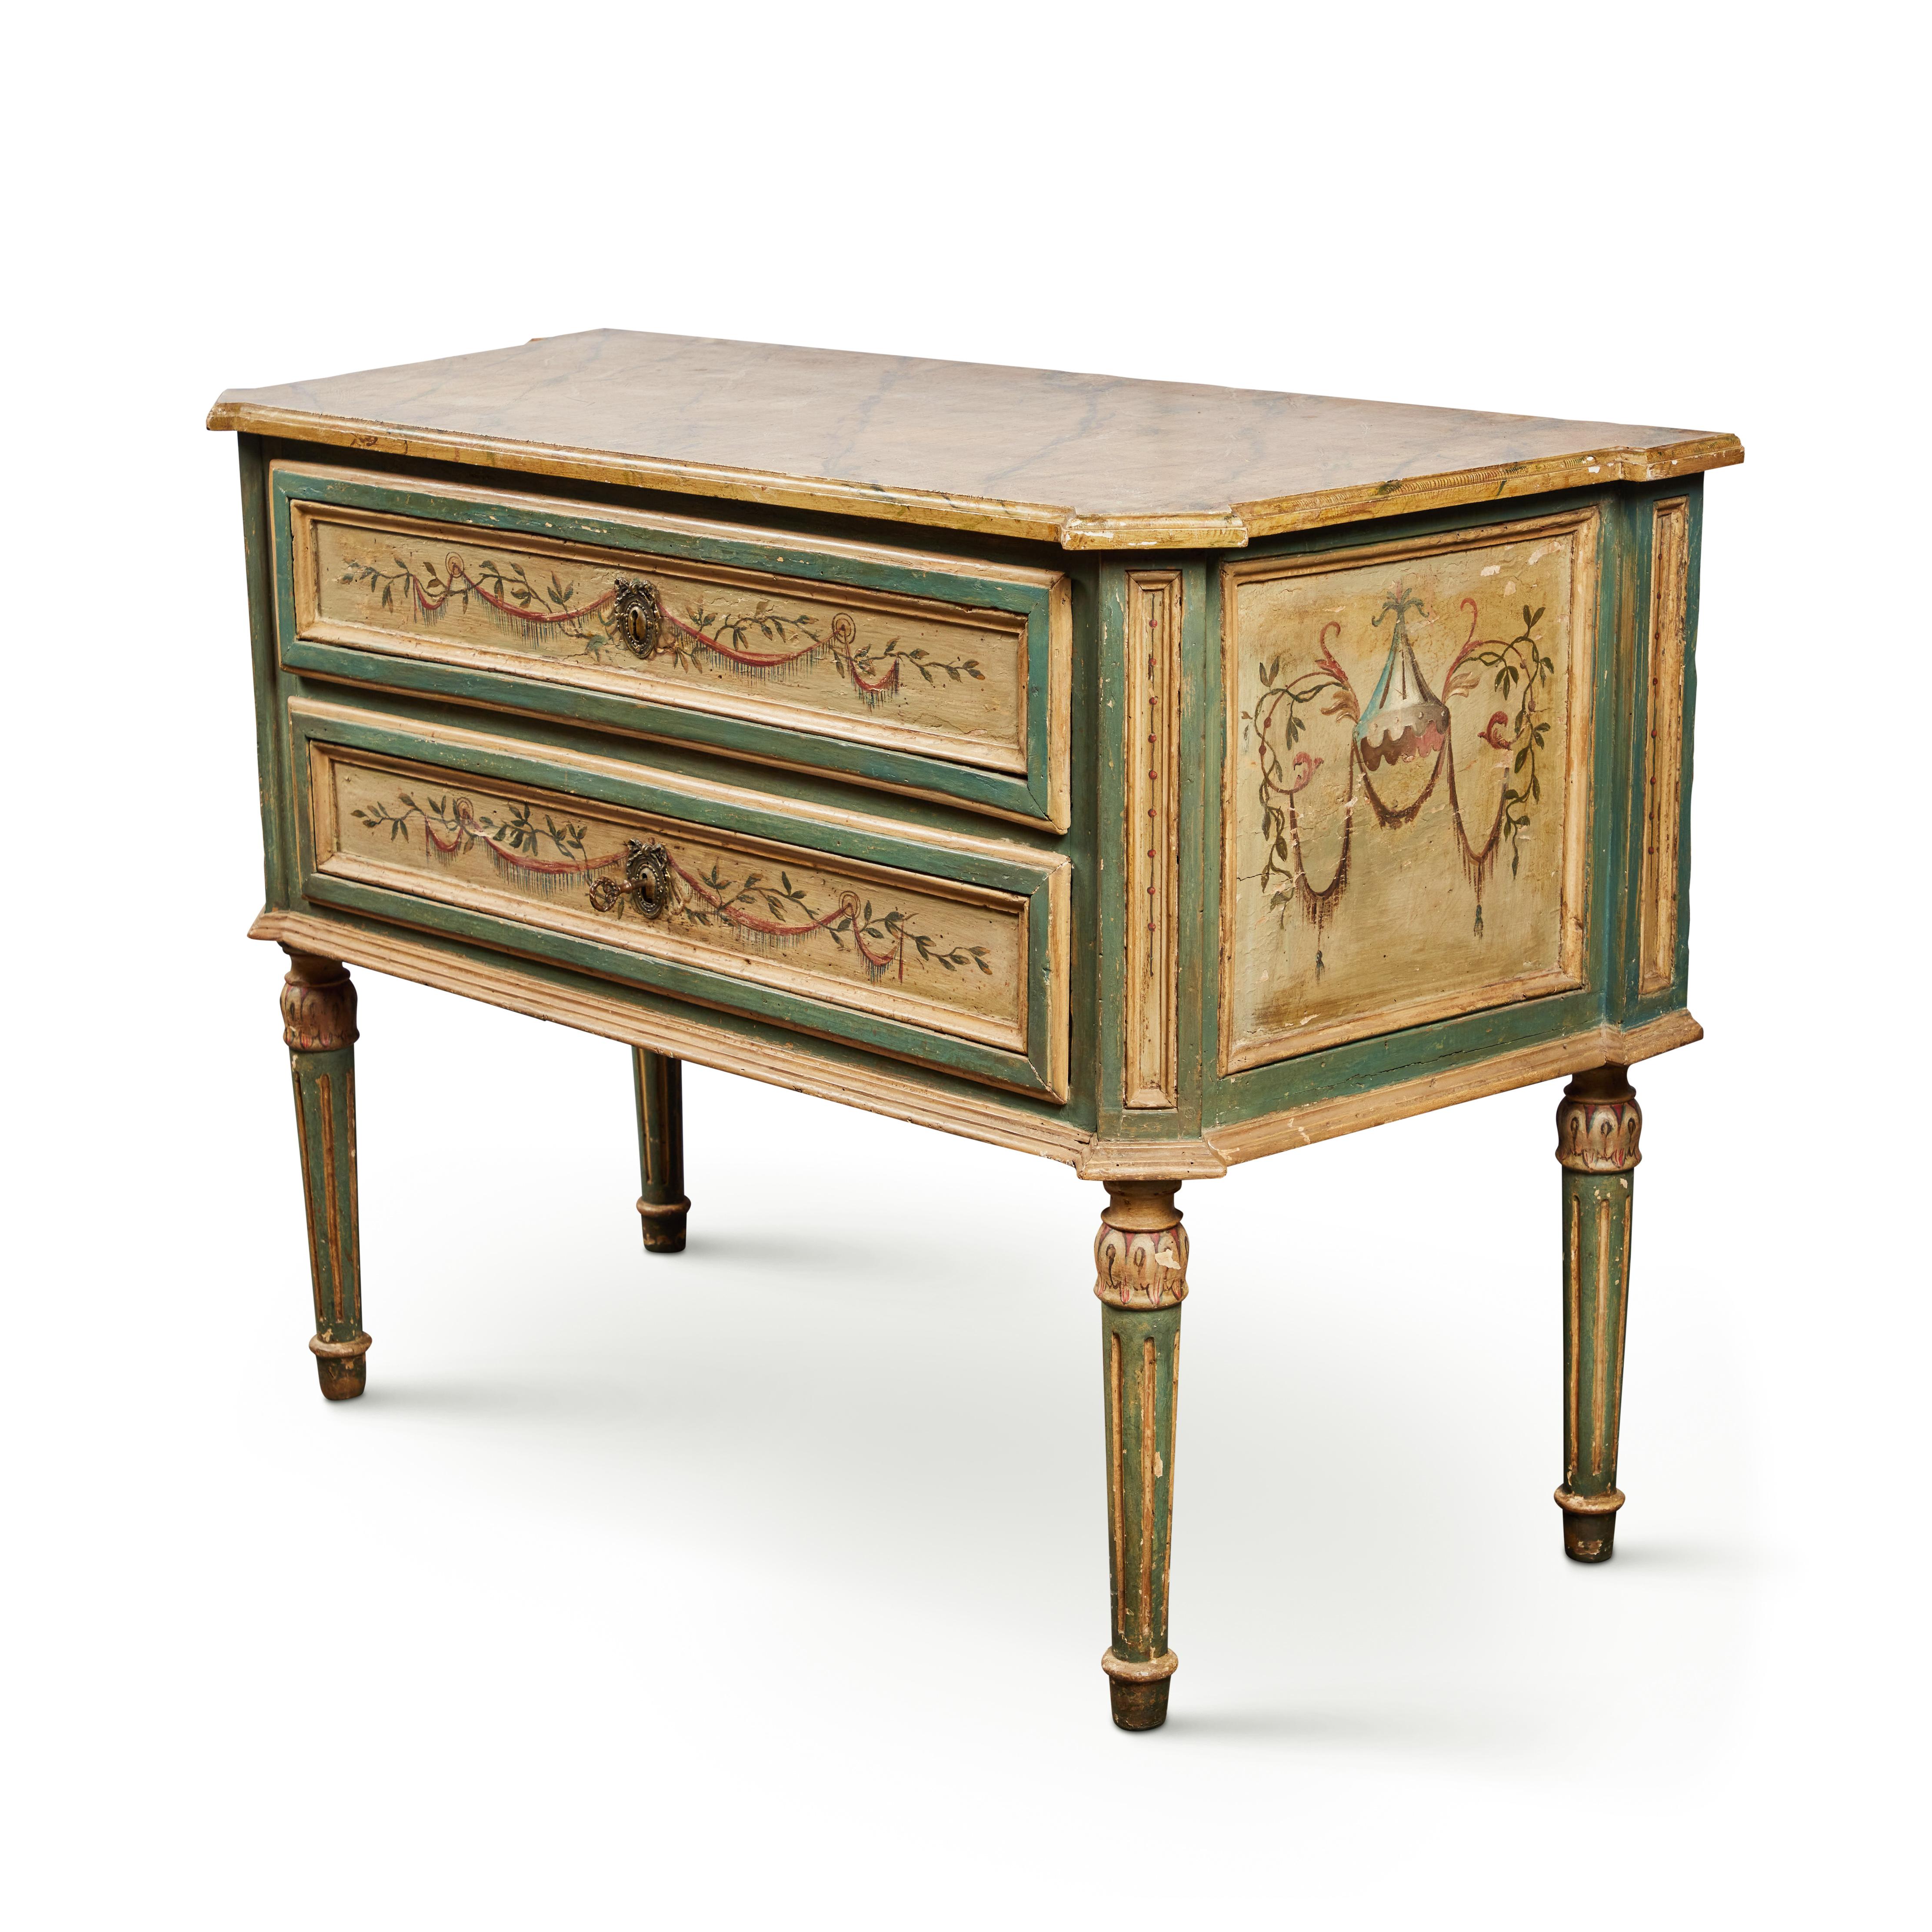 An absolutely charming, hand-carved and painted, two drawer commode surmounted by a faux marble top. The paneled body in in painted vines and swags of ribbon centered on the raised, gilt bronze escutcheons. The whole on fluted, tapered legs.